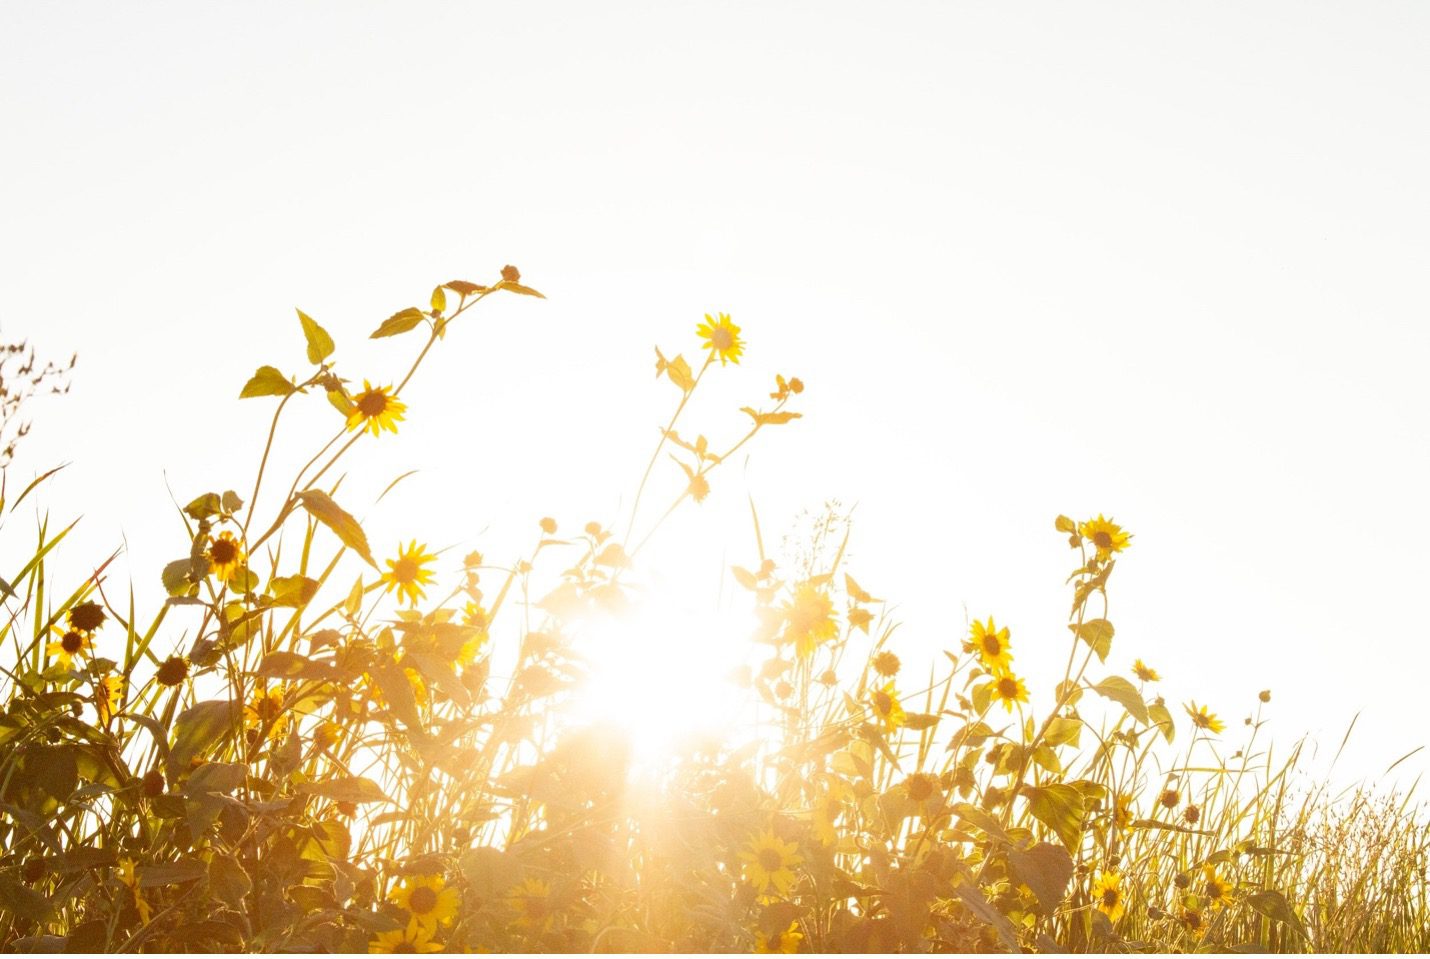 Sunlight shining through a field of flowers at sunset represents the WELL light concept